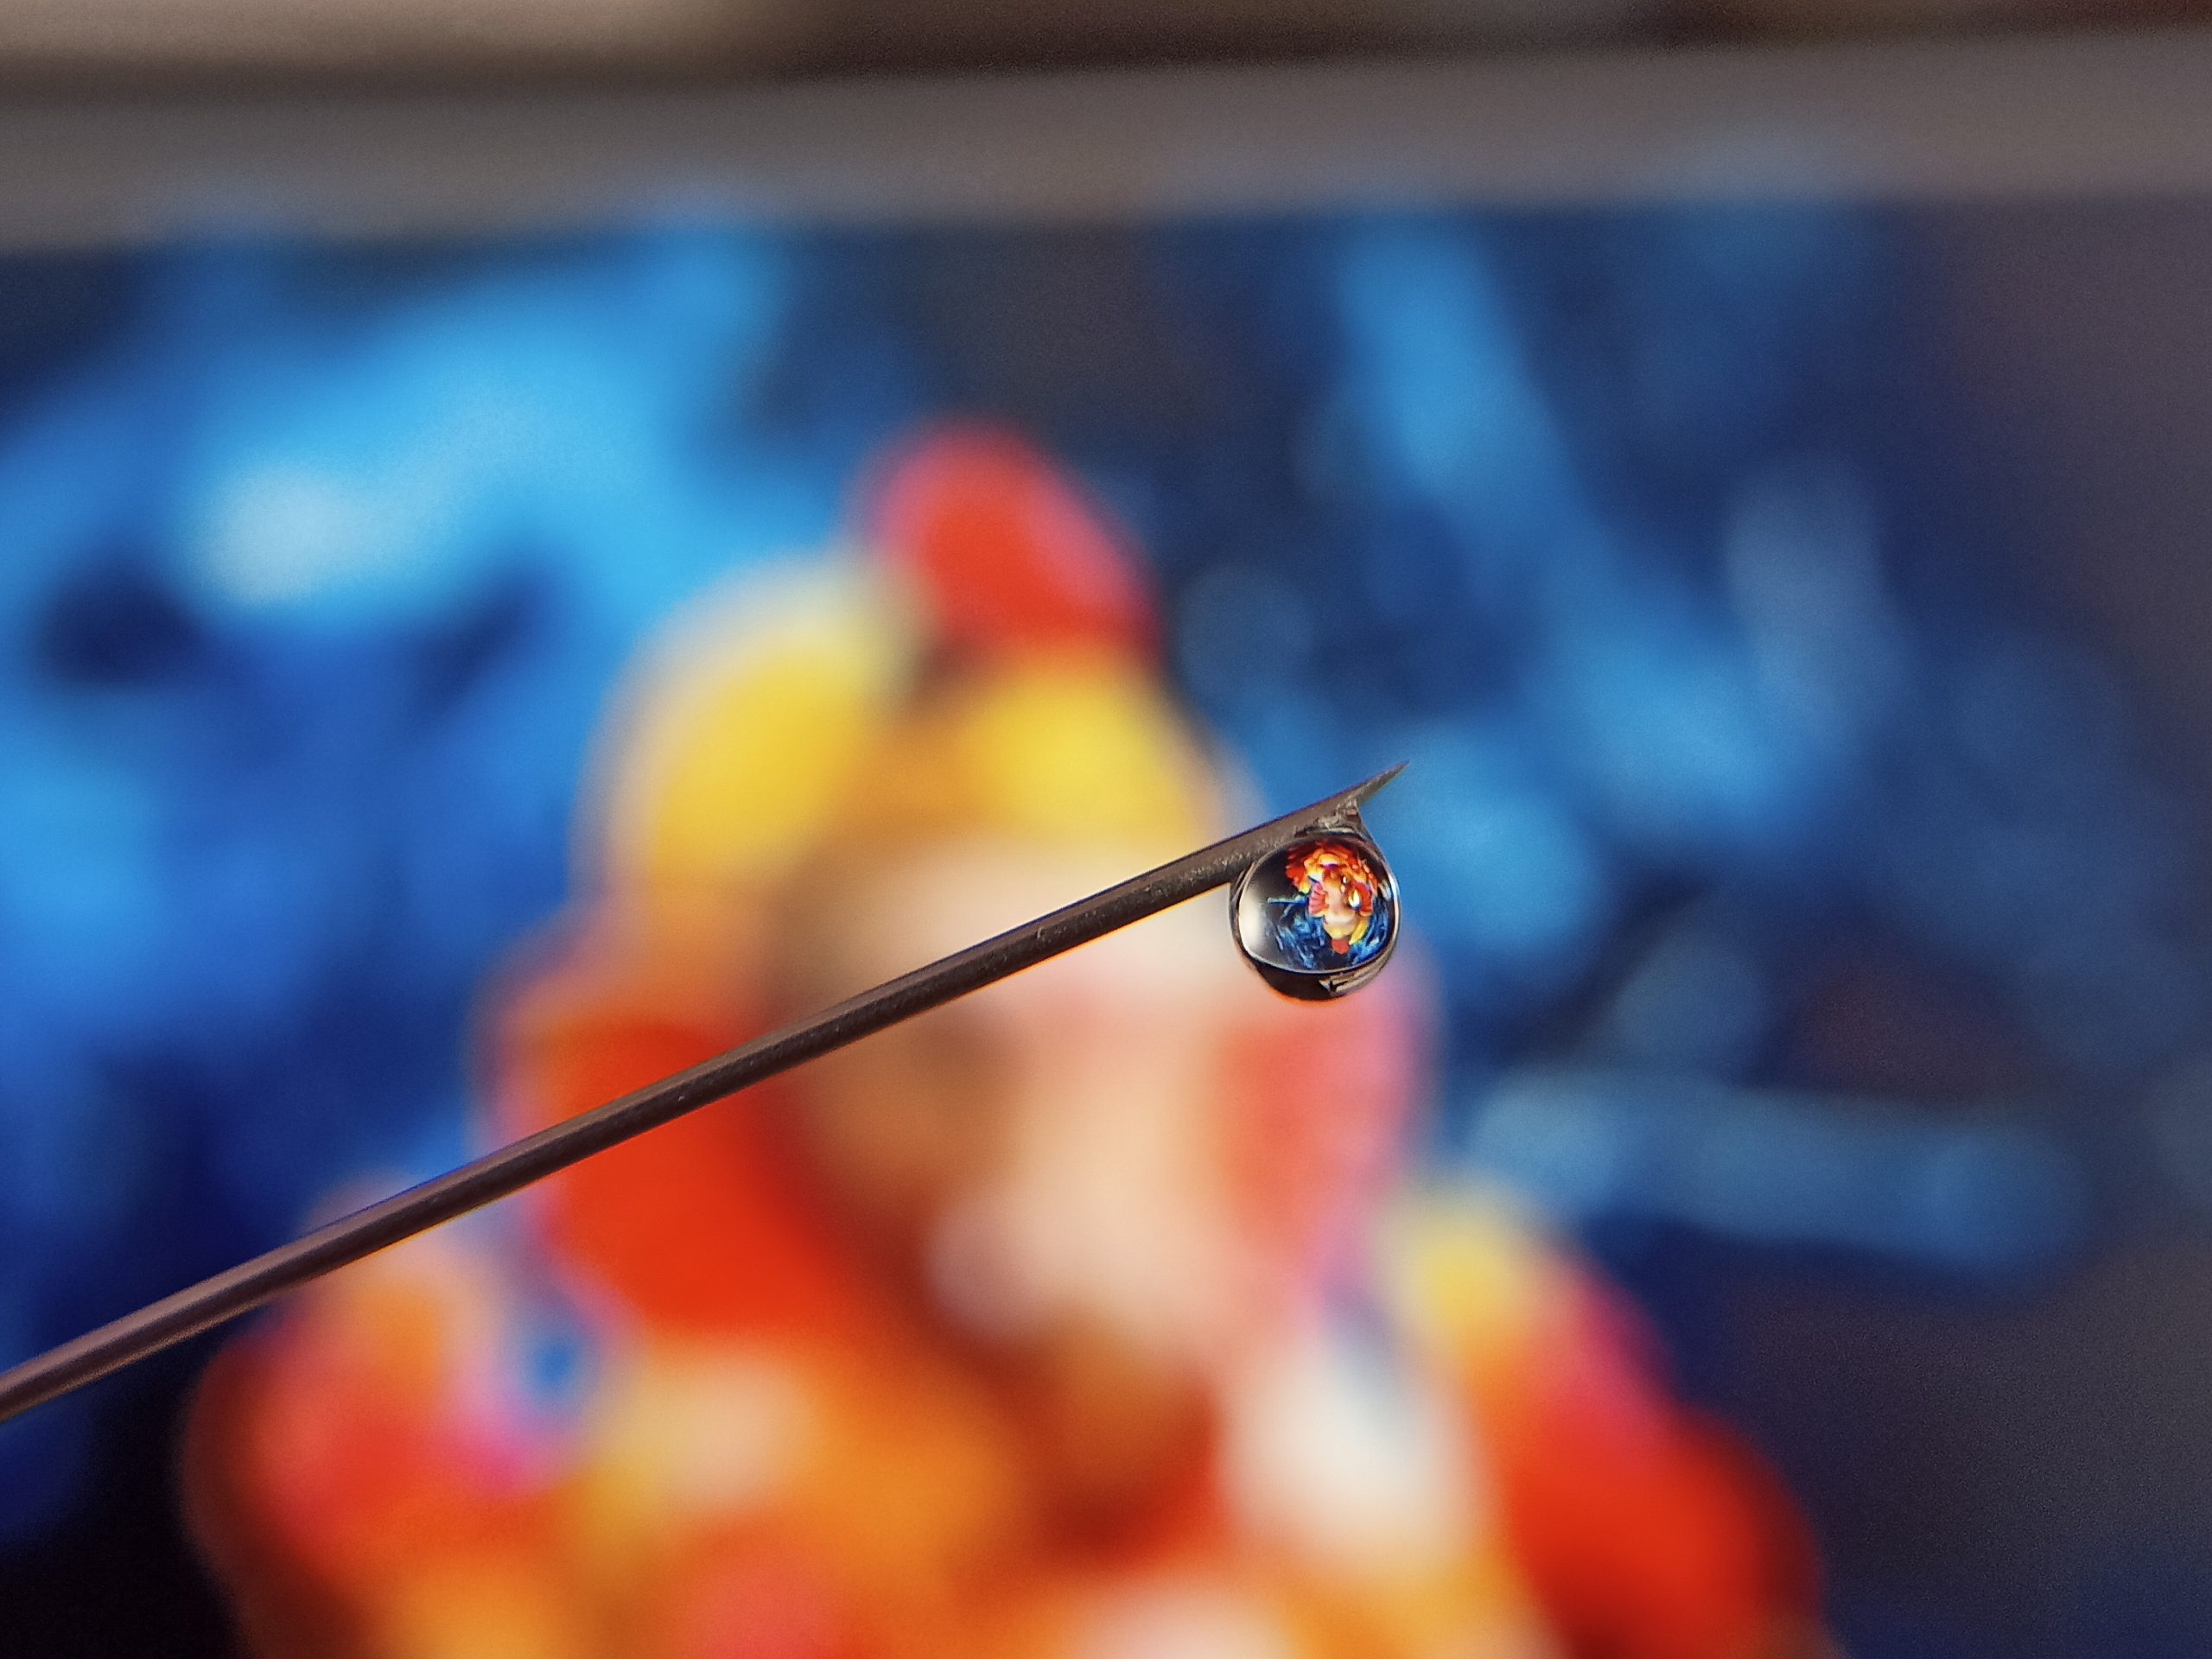 Water drop on a needle